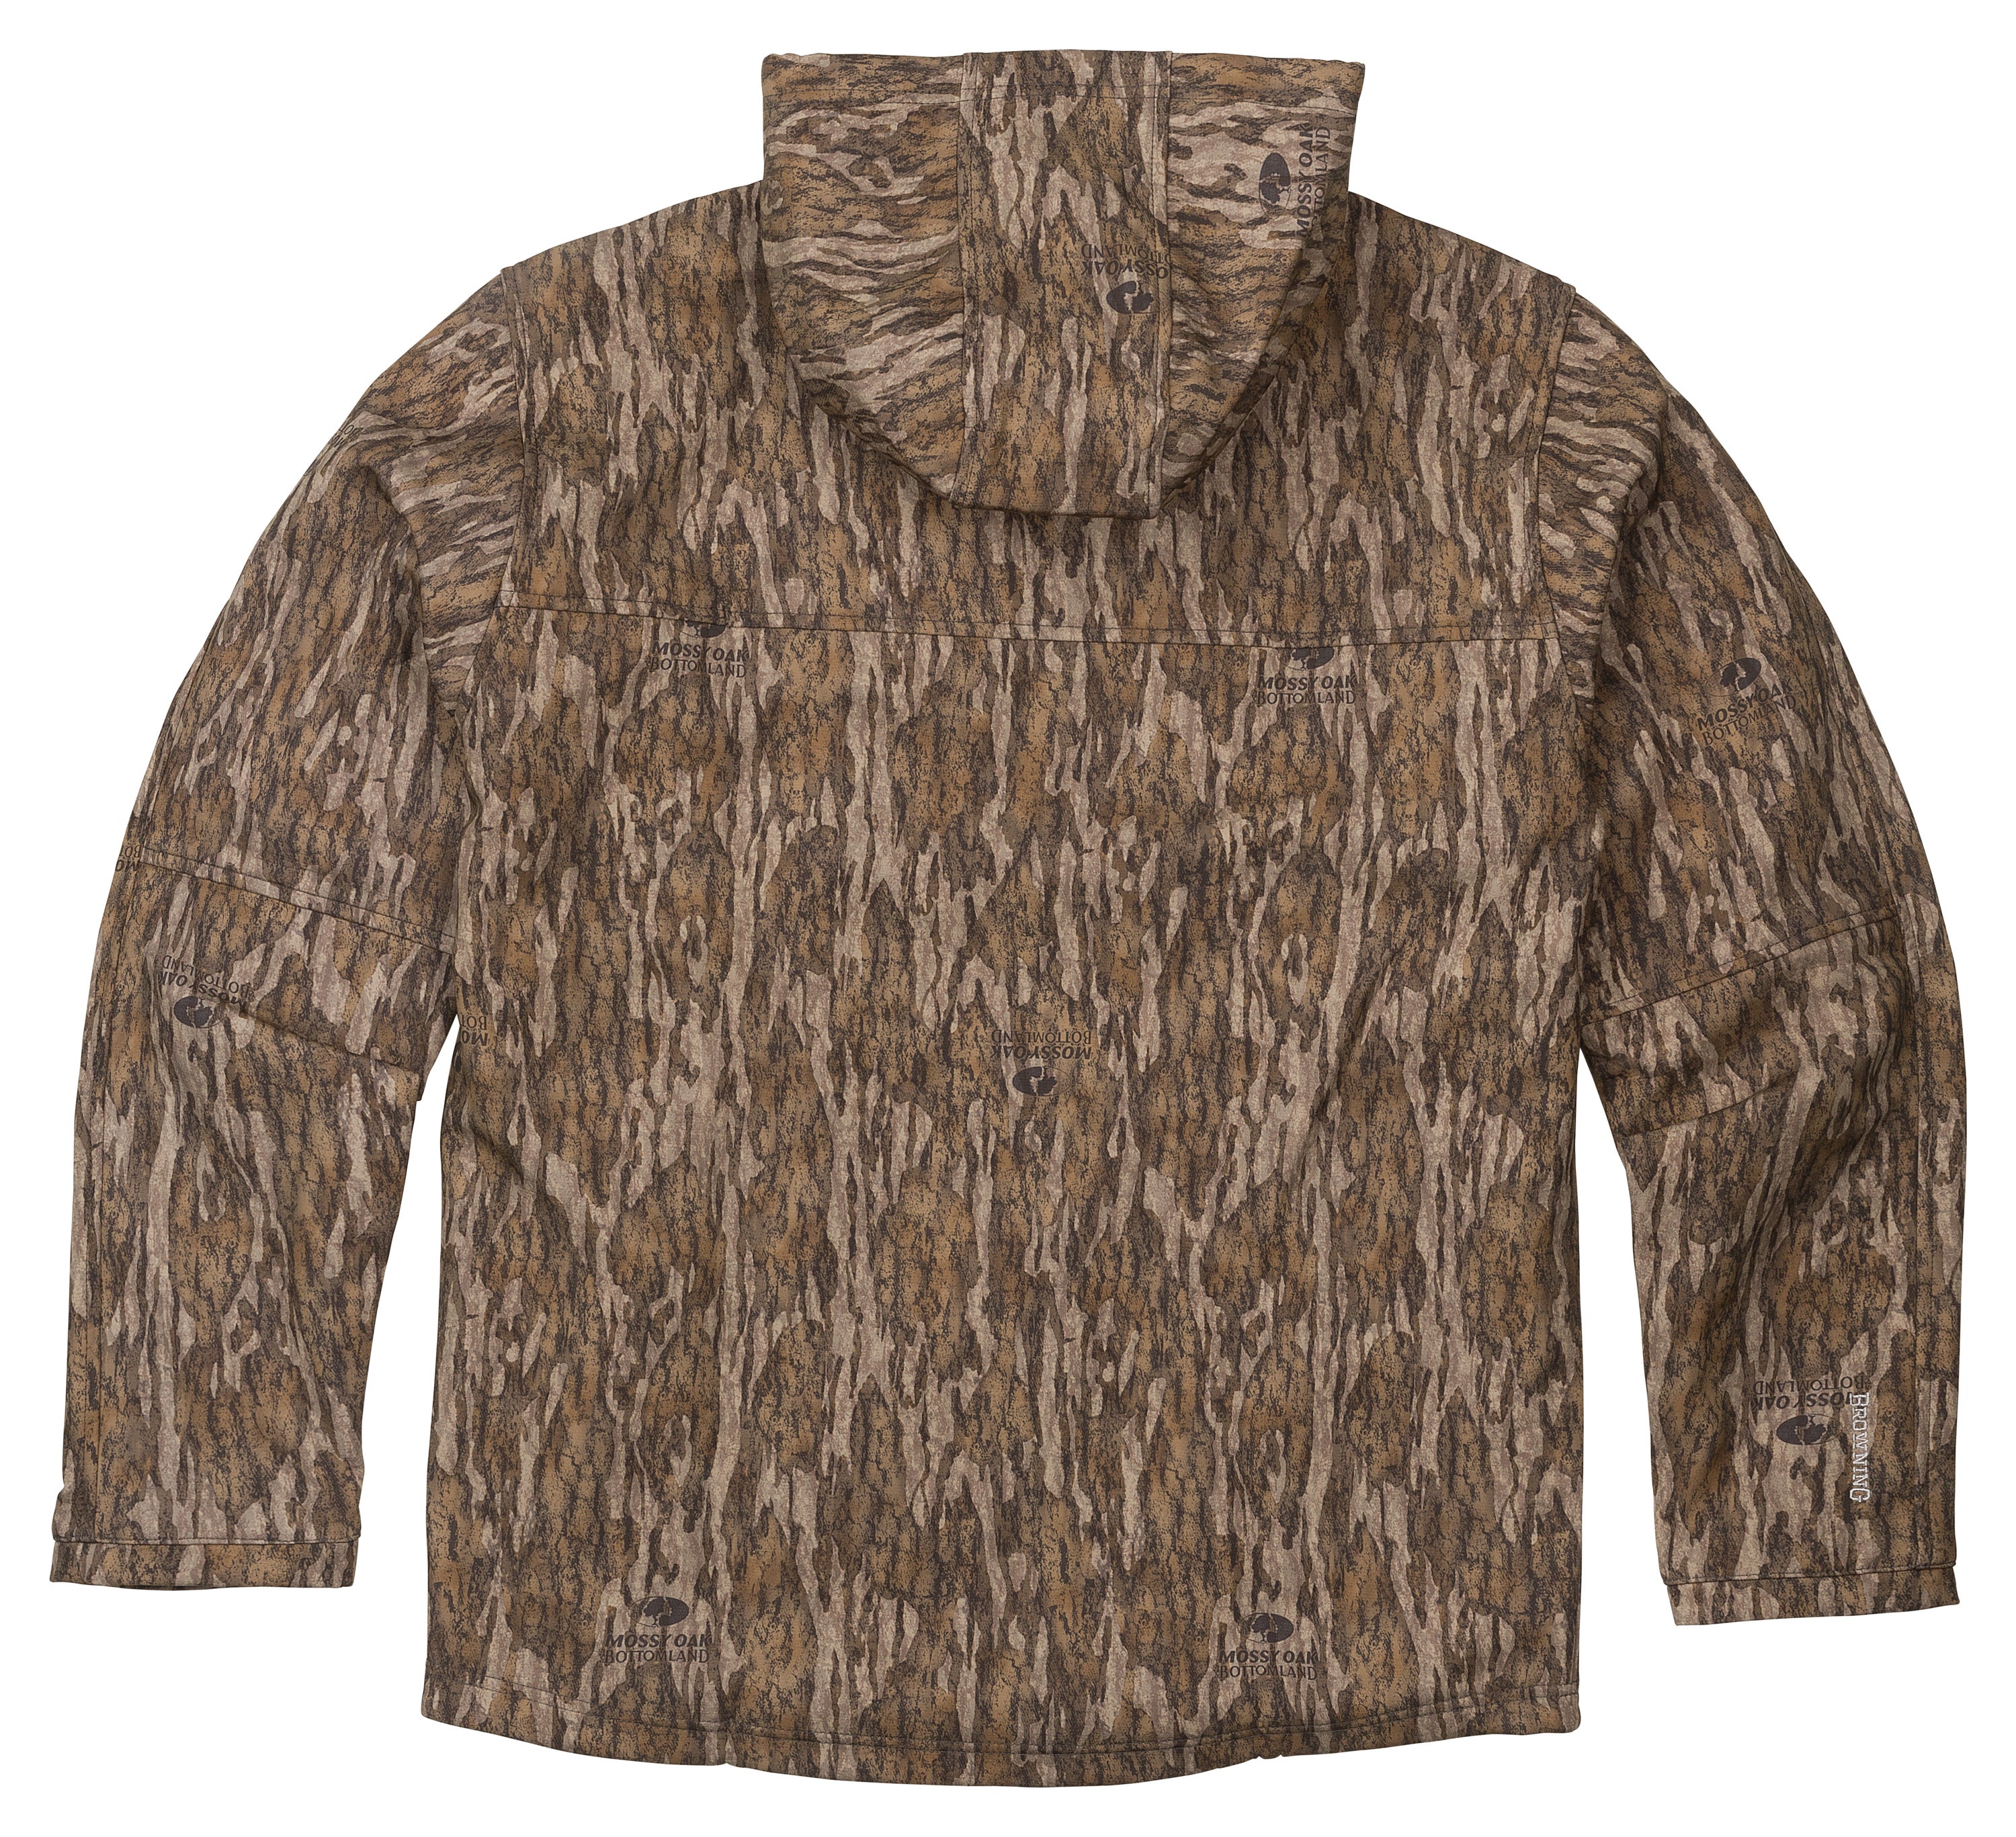 REALTREE TIMBER CAMO NEW BROWNING WICKED WING SMOOTHBORE HOODIE 